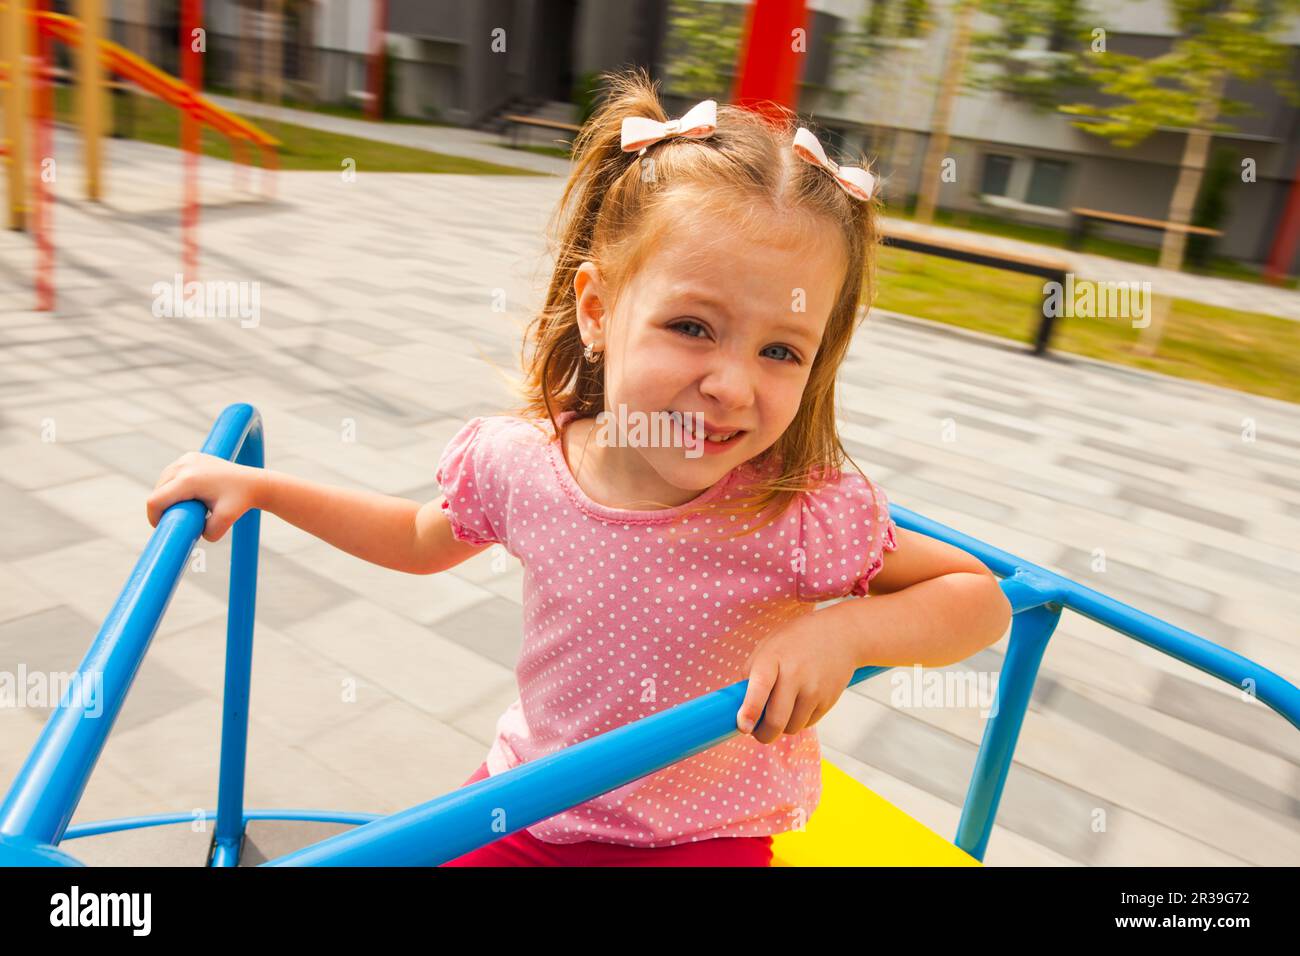 Little girl playing on the outdoors playground. Stock Photo